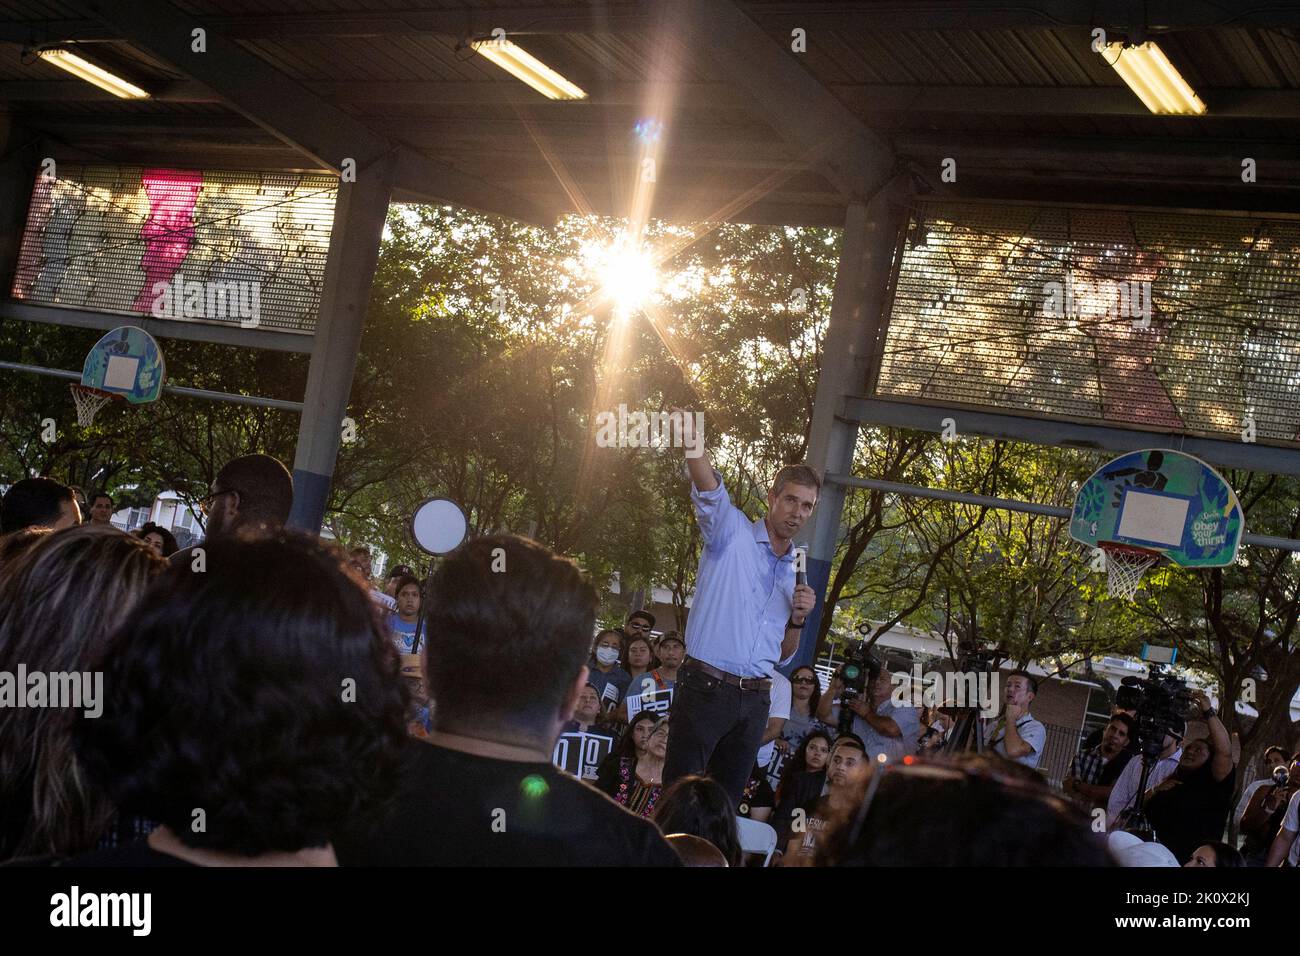 Texas Democratic gubernatorial candidate and former U.S. congressman Beto O'Rourke speaks to supporters at a campaign event in Houston, Texas, U.S. September 13, 2022. REUTERS/Adrees Latif Stock Photo